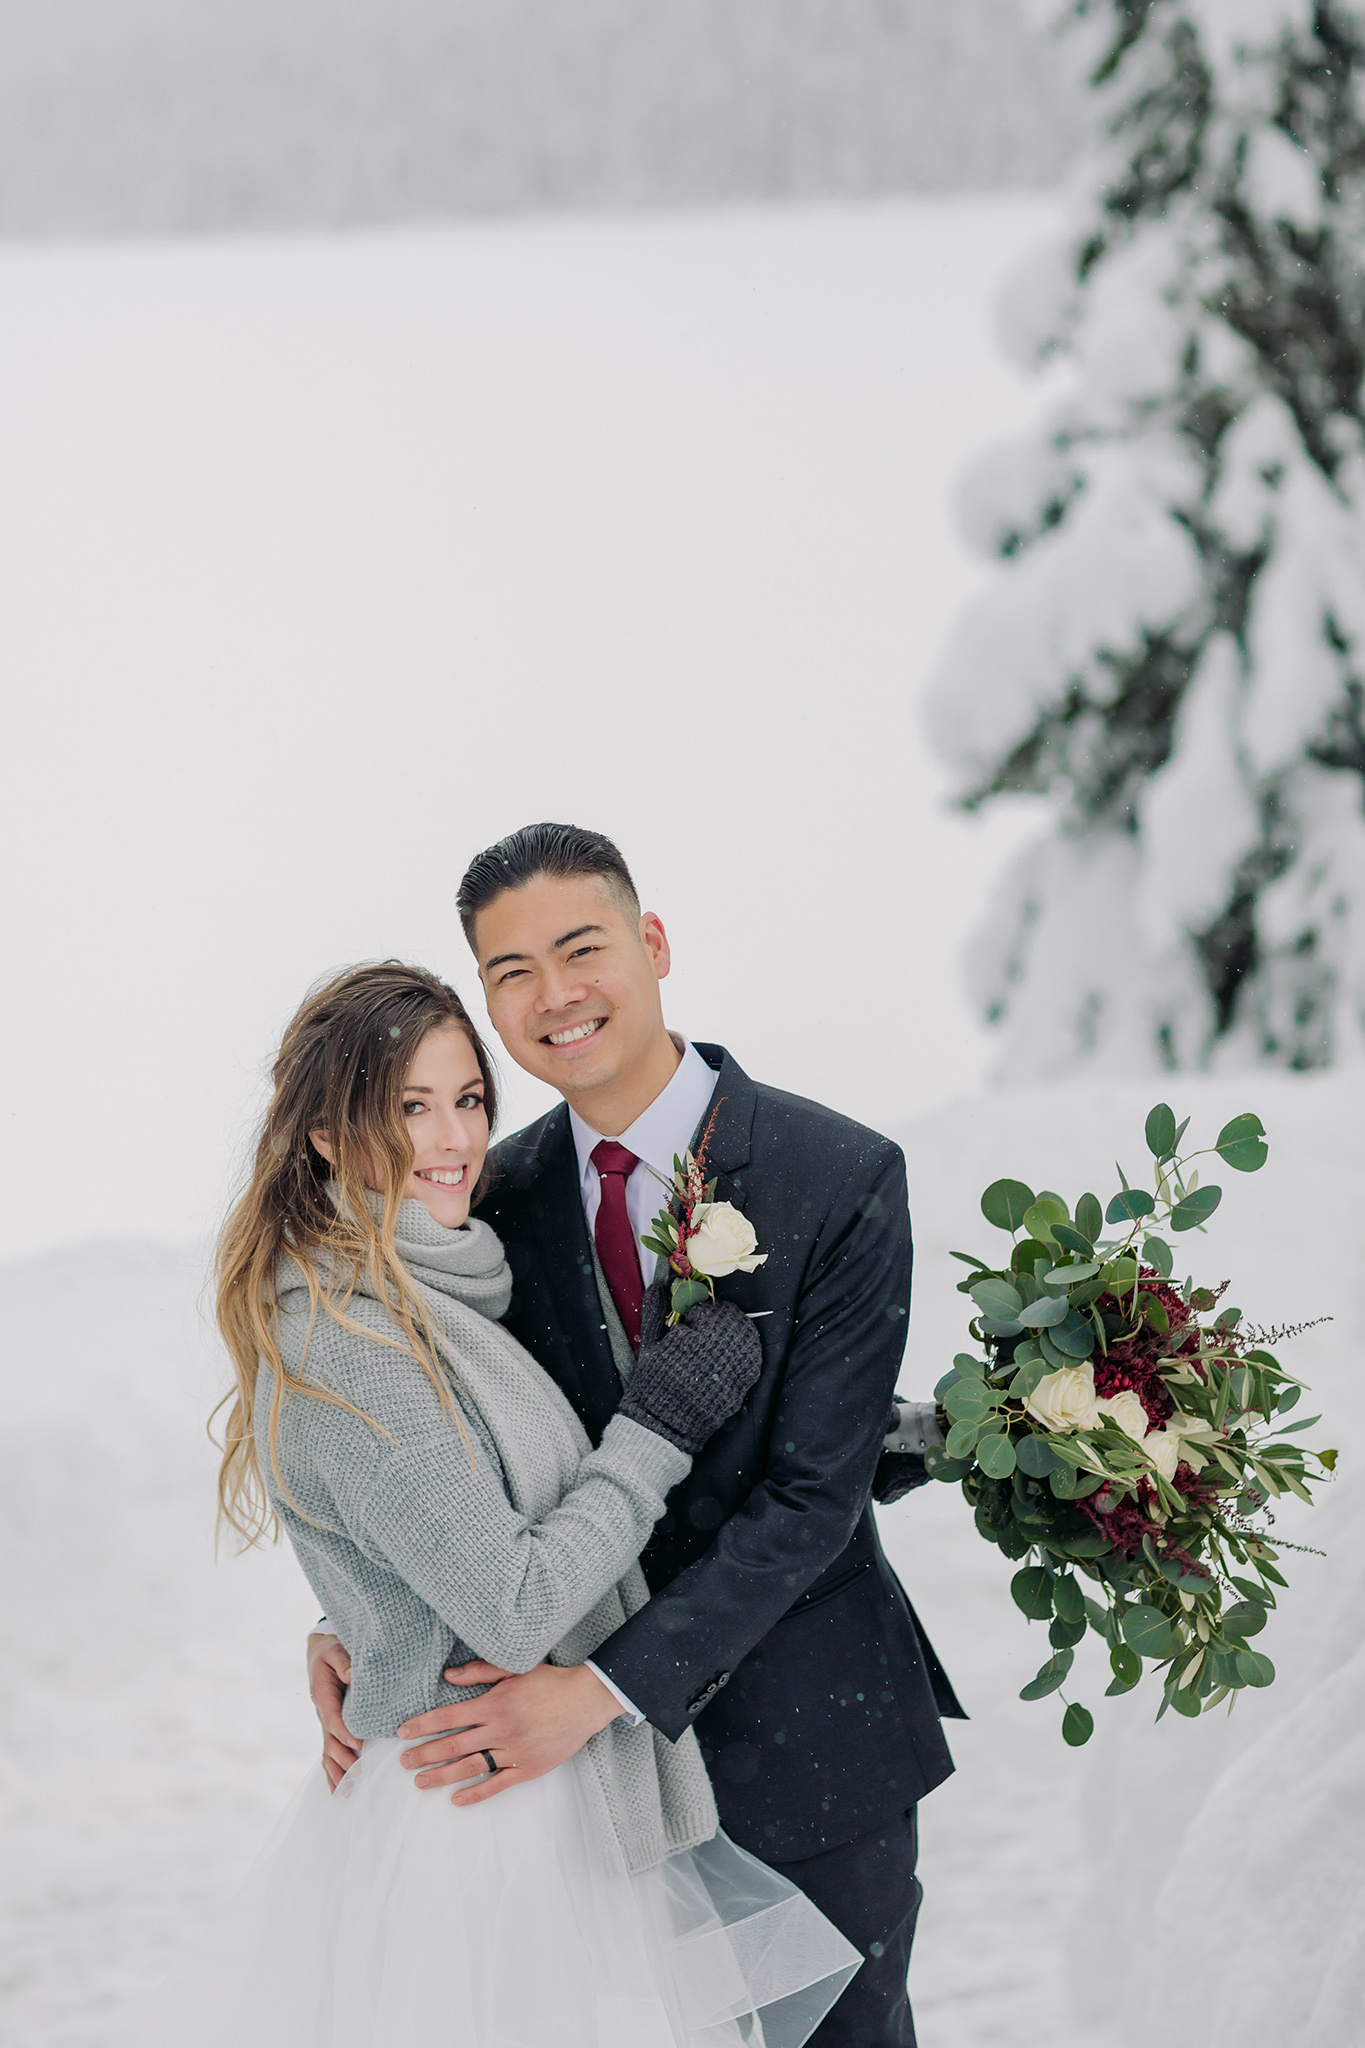 Snowy winter elopement at Emerald Lake Lodge in Yoho National Park. Outdoor winter wedding ceremony at the Viewpoint overlooking mountains & forest.